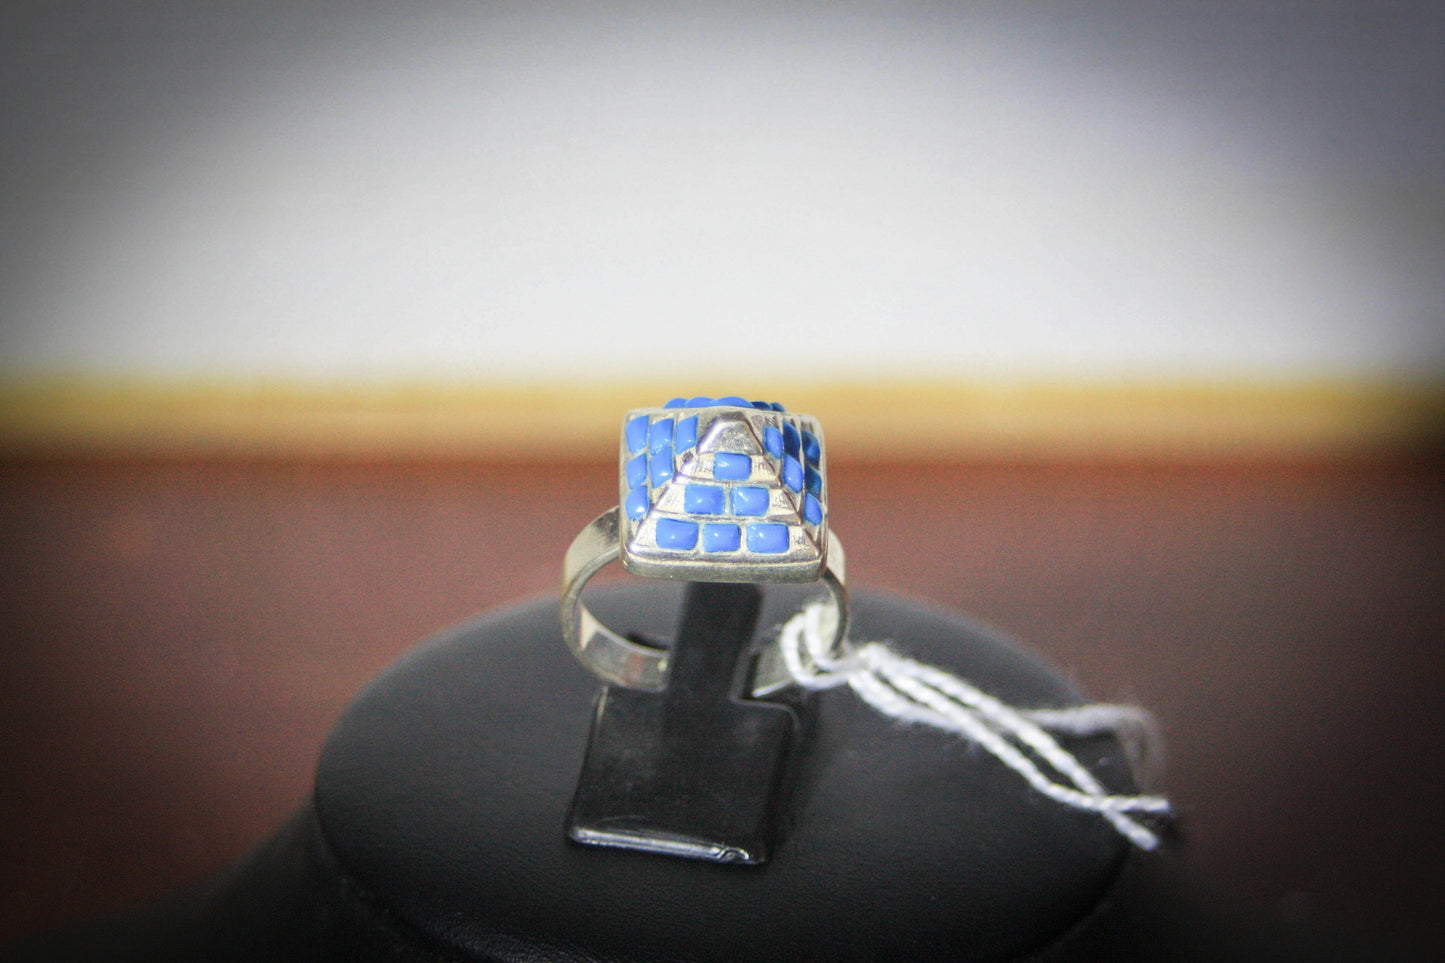 antique-style-pyramid-ring-turquoise-enamel-engraved-925-egyptian-silver-made-in-egypt